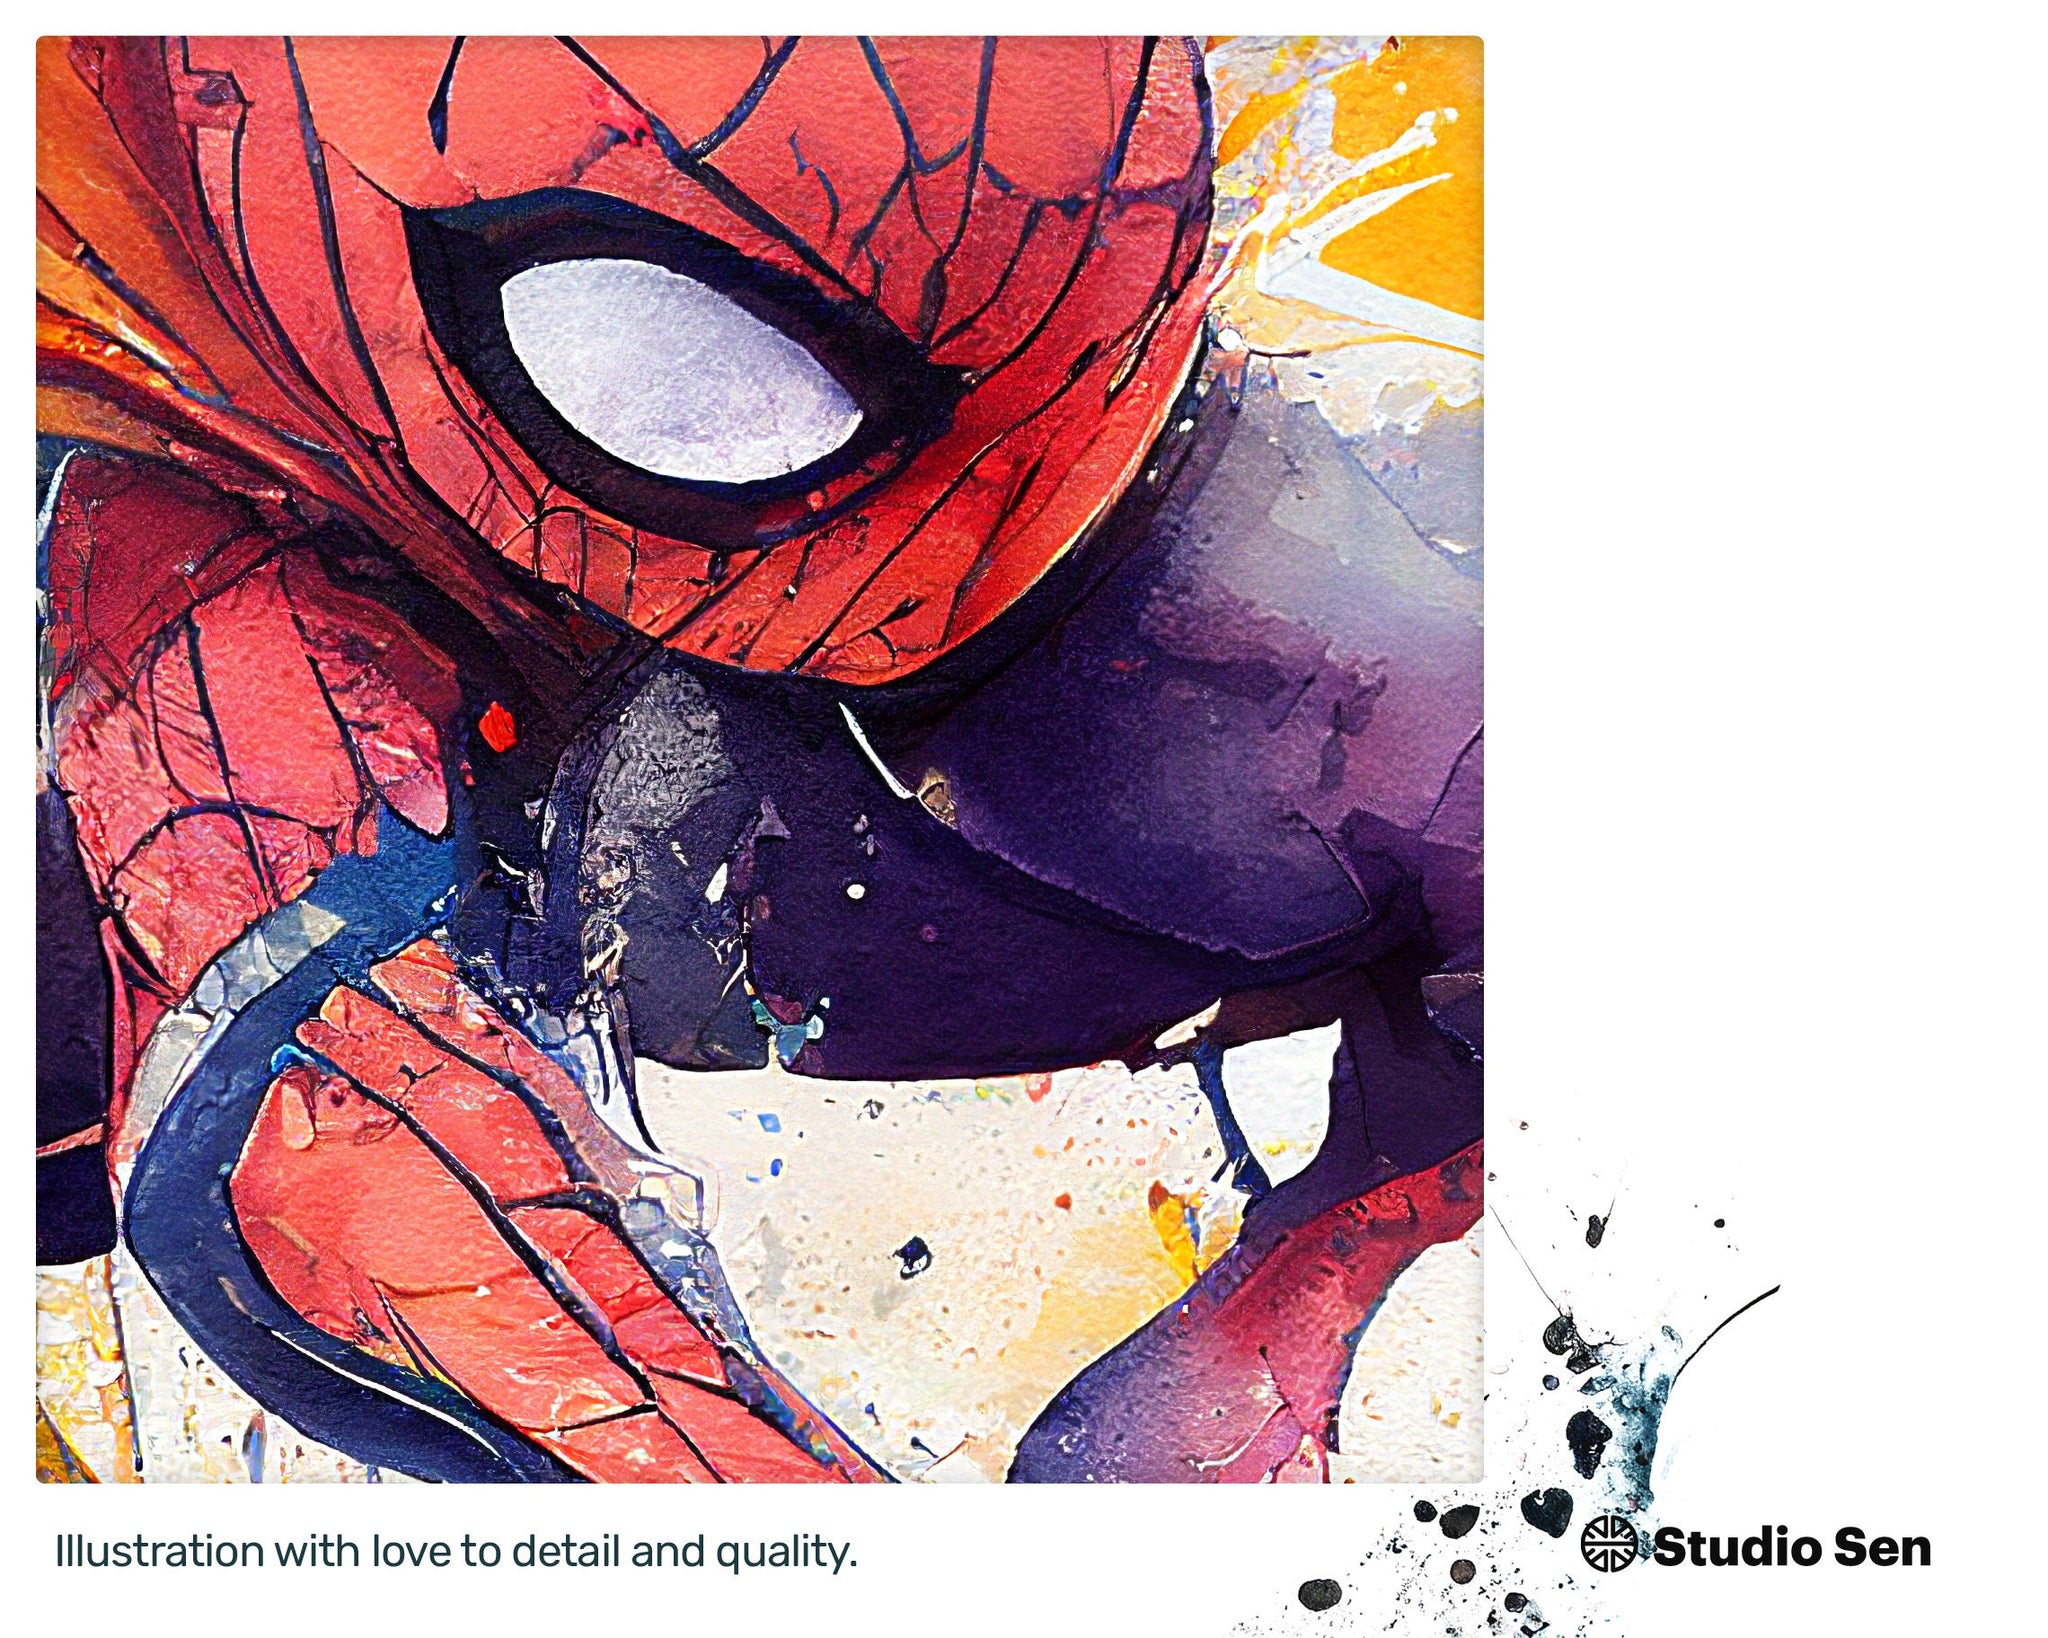 Web-slinging Large Spiderman, Xclusive Incredible artwork, Quaint Cheerful Delightful Quirky Cute Digital Download